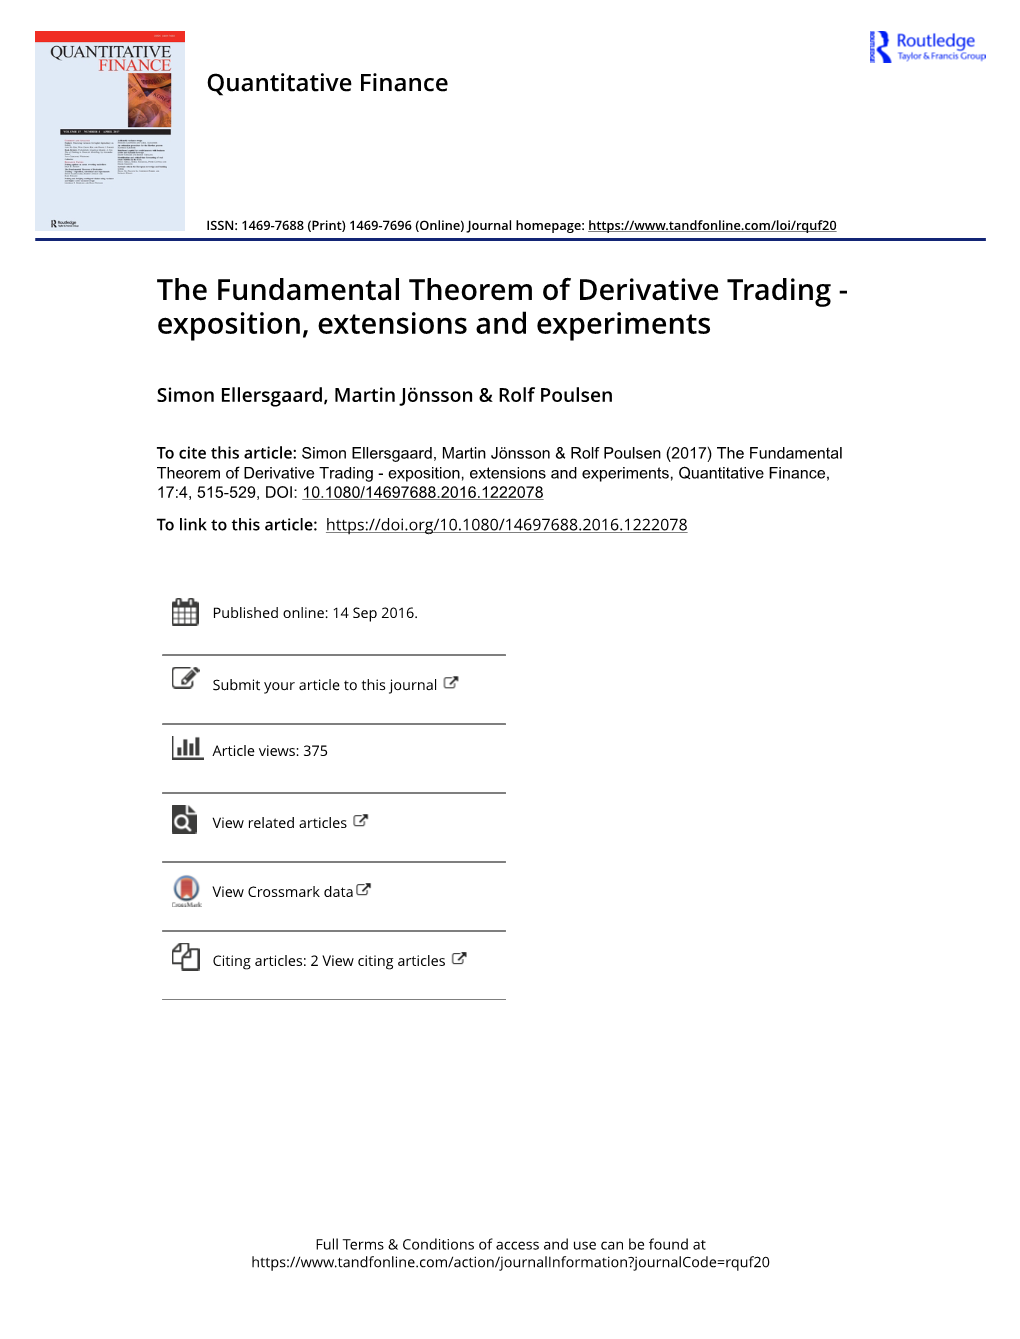 The Fundamental Theorem of Derivative Trading - Exposition, Extensions and Experiments